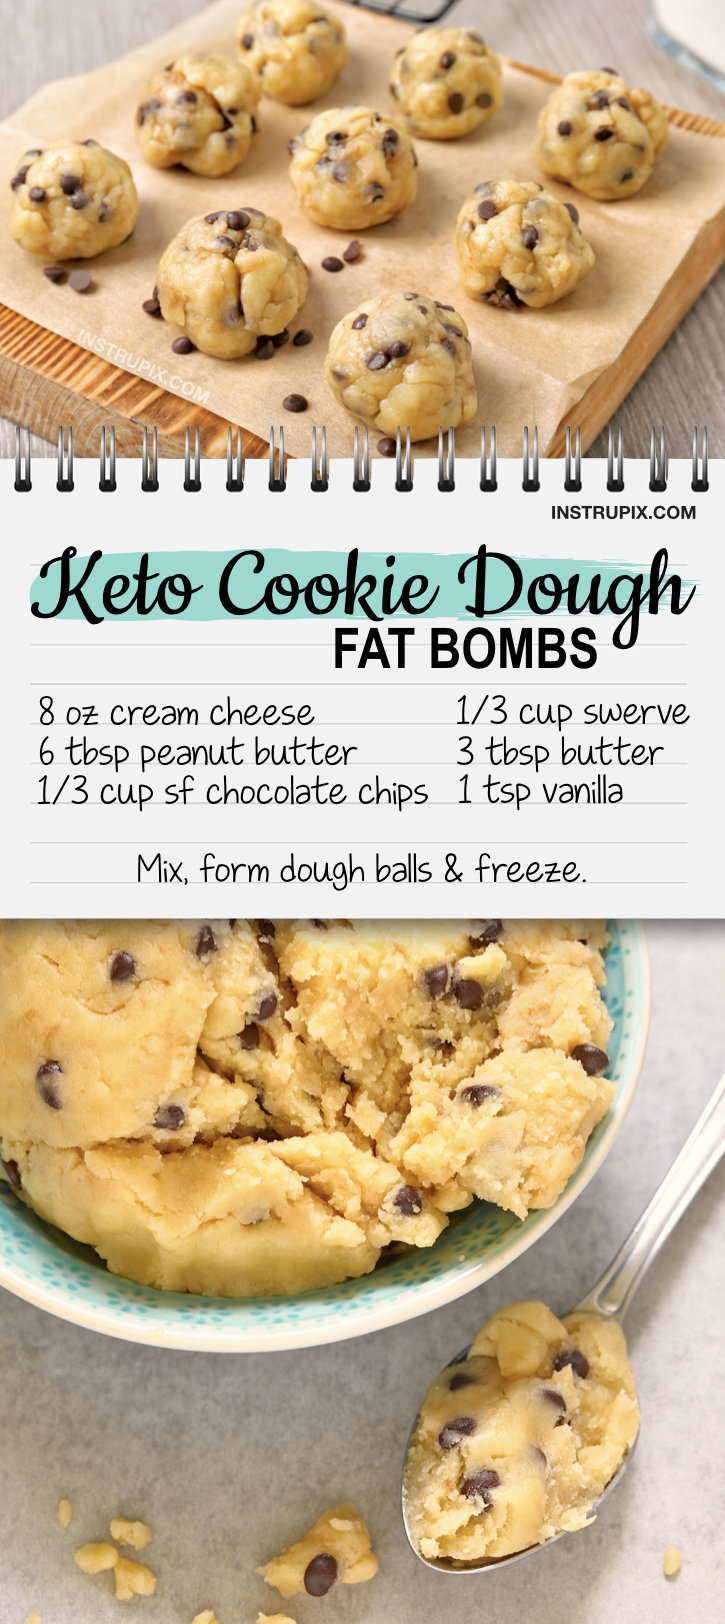 Looking for easy keto fat bom recipes? These quick and easy low carb cookie dough bites are made with cream cheese, peanut butter, swerve, butter, chocolate chips and vanilla. Simple and easy to make! If you like edible cookie dough, you're going to love this easy keto dessert idea. Serious craving crushers! Perfect for a low carb or ketogenic diet. #keto #lowcarb